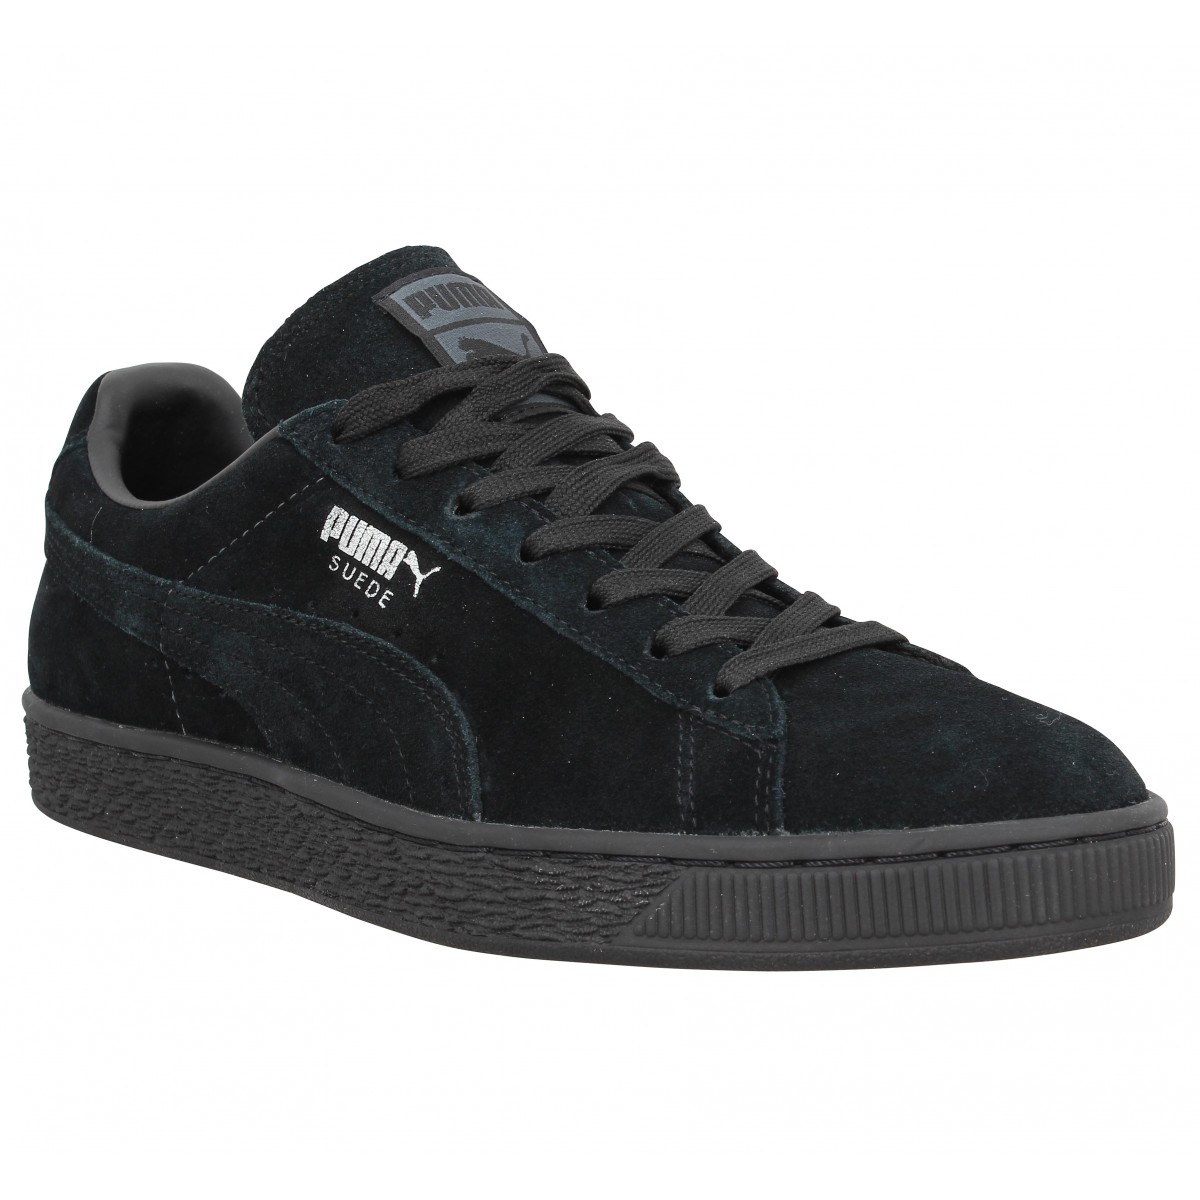 puma suede homme rouge cheap online